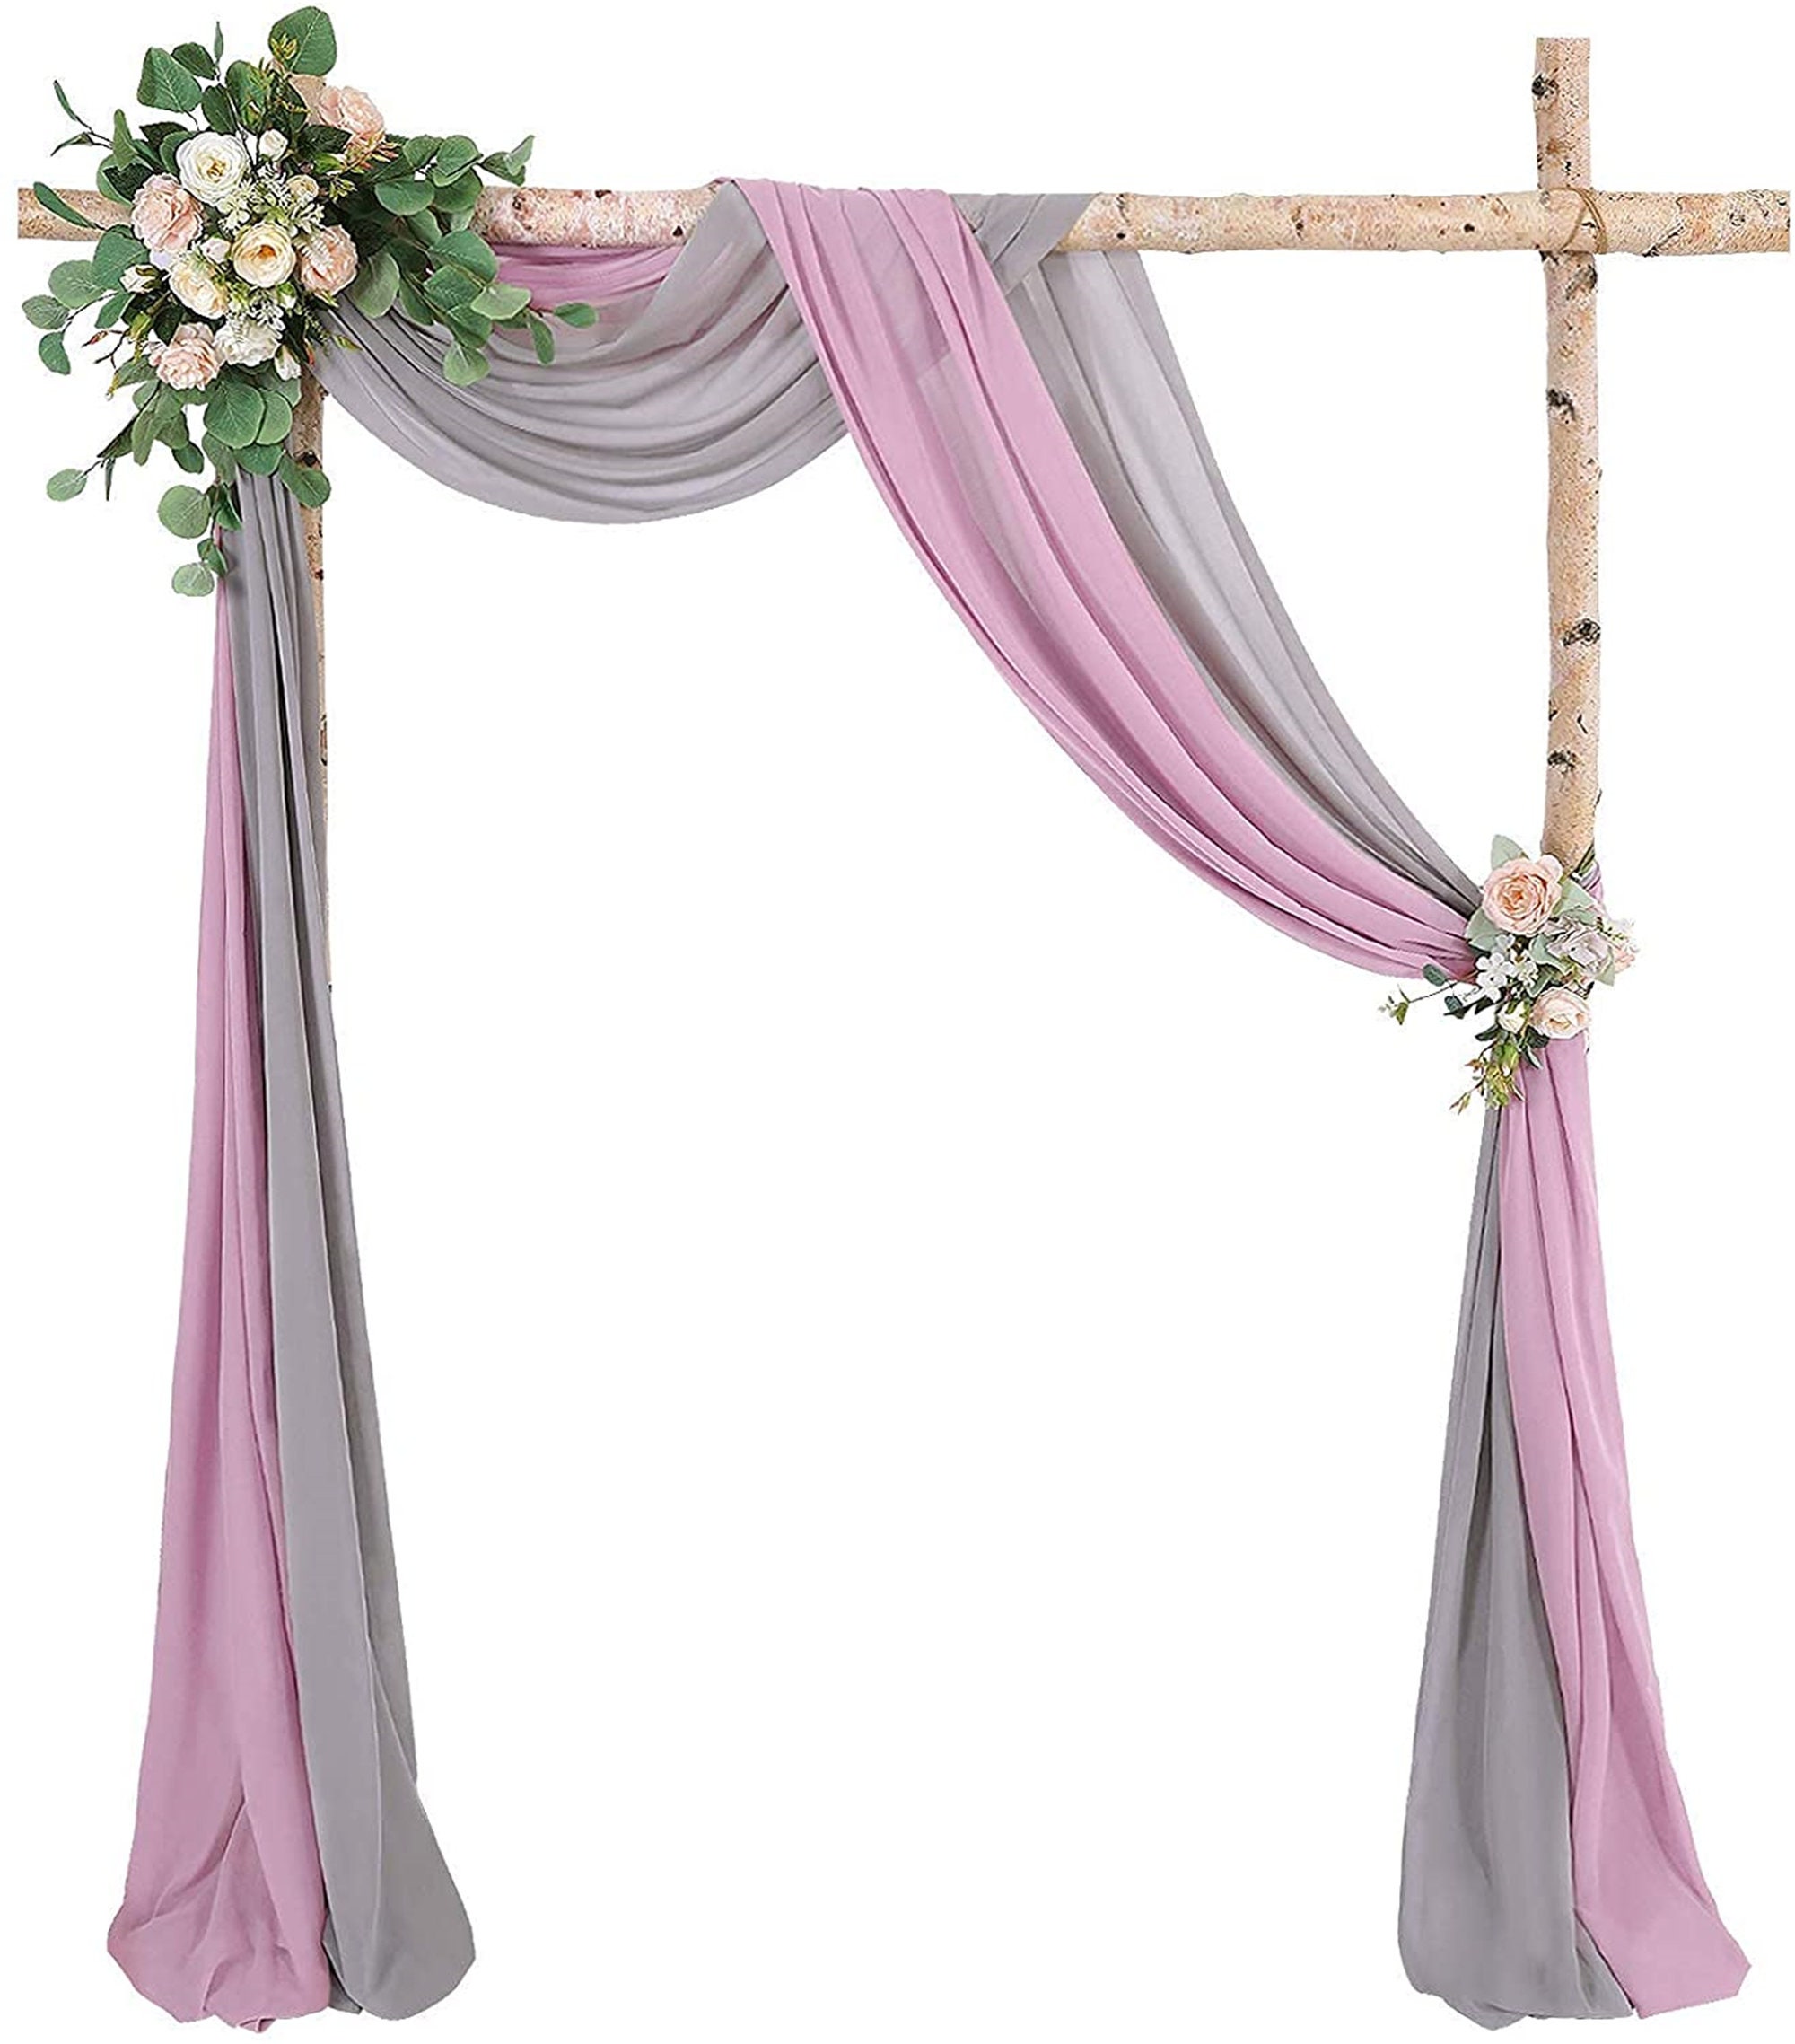 Wedding Arch Drapes Mauve and Gray 2 Pieces 6 Yards Sheer | Etsy